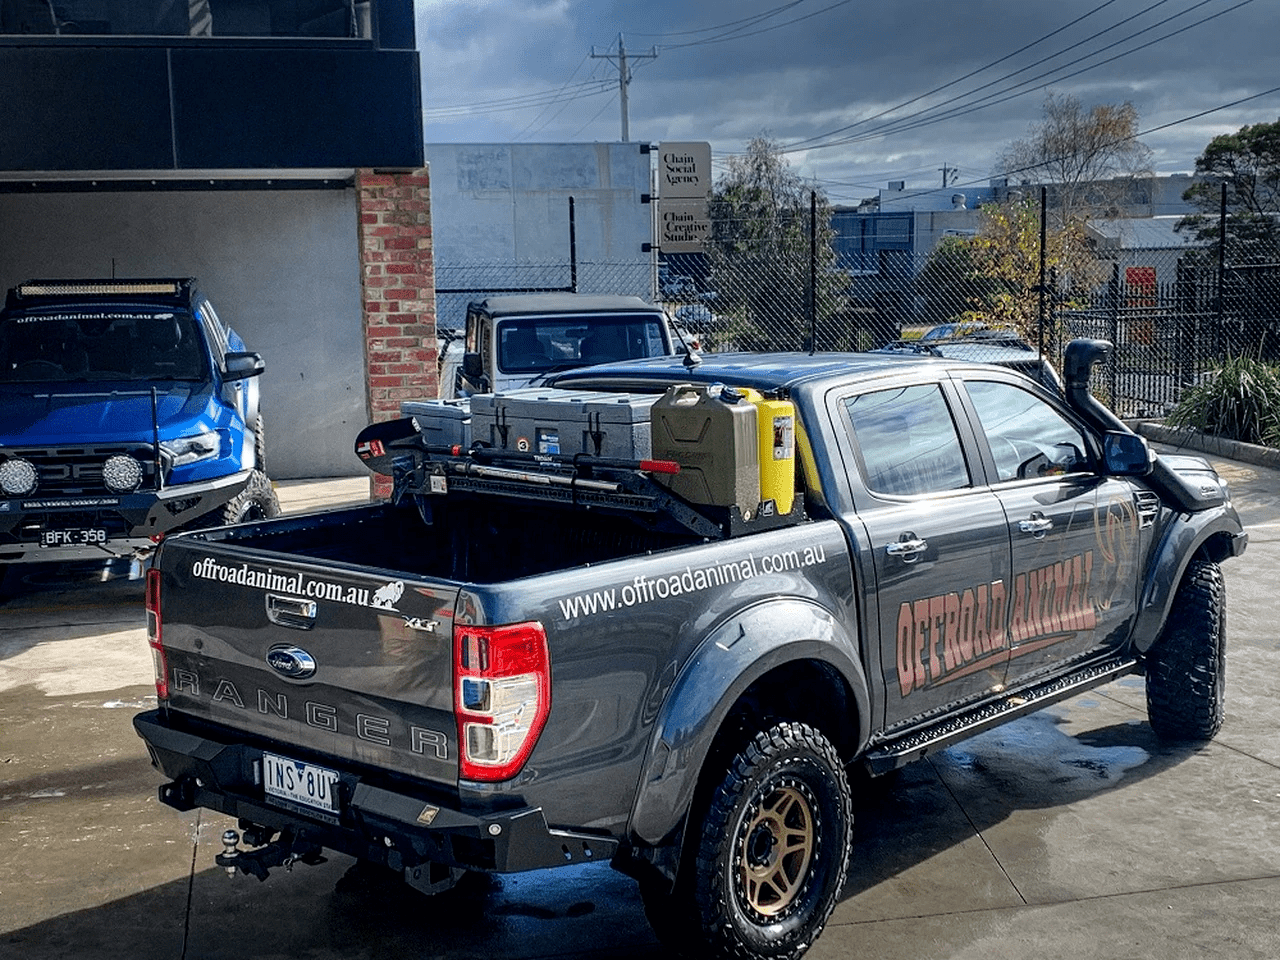 Offroad Animal - Offroad Animal - Adventure Rack - Universal fit All Aussie Utes - 4X4OC™ | 4x4 Offroad Centre